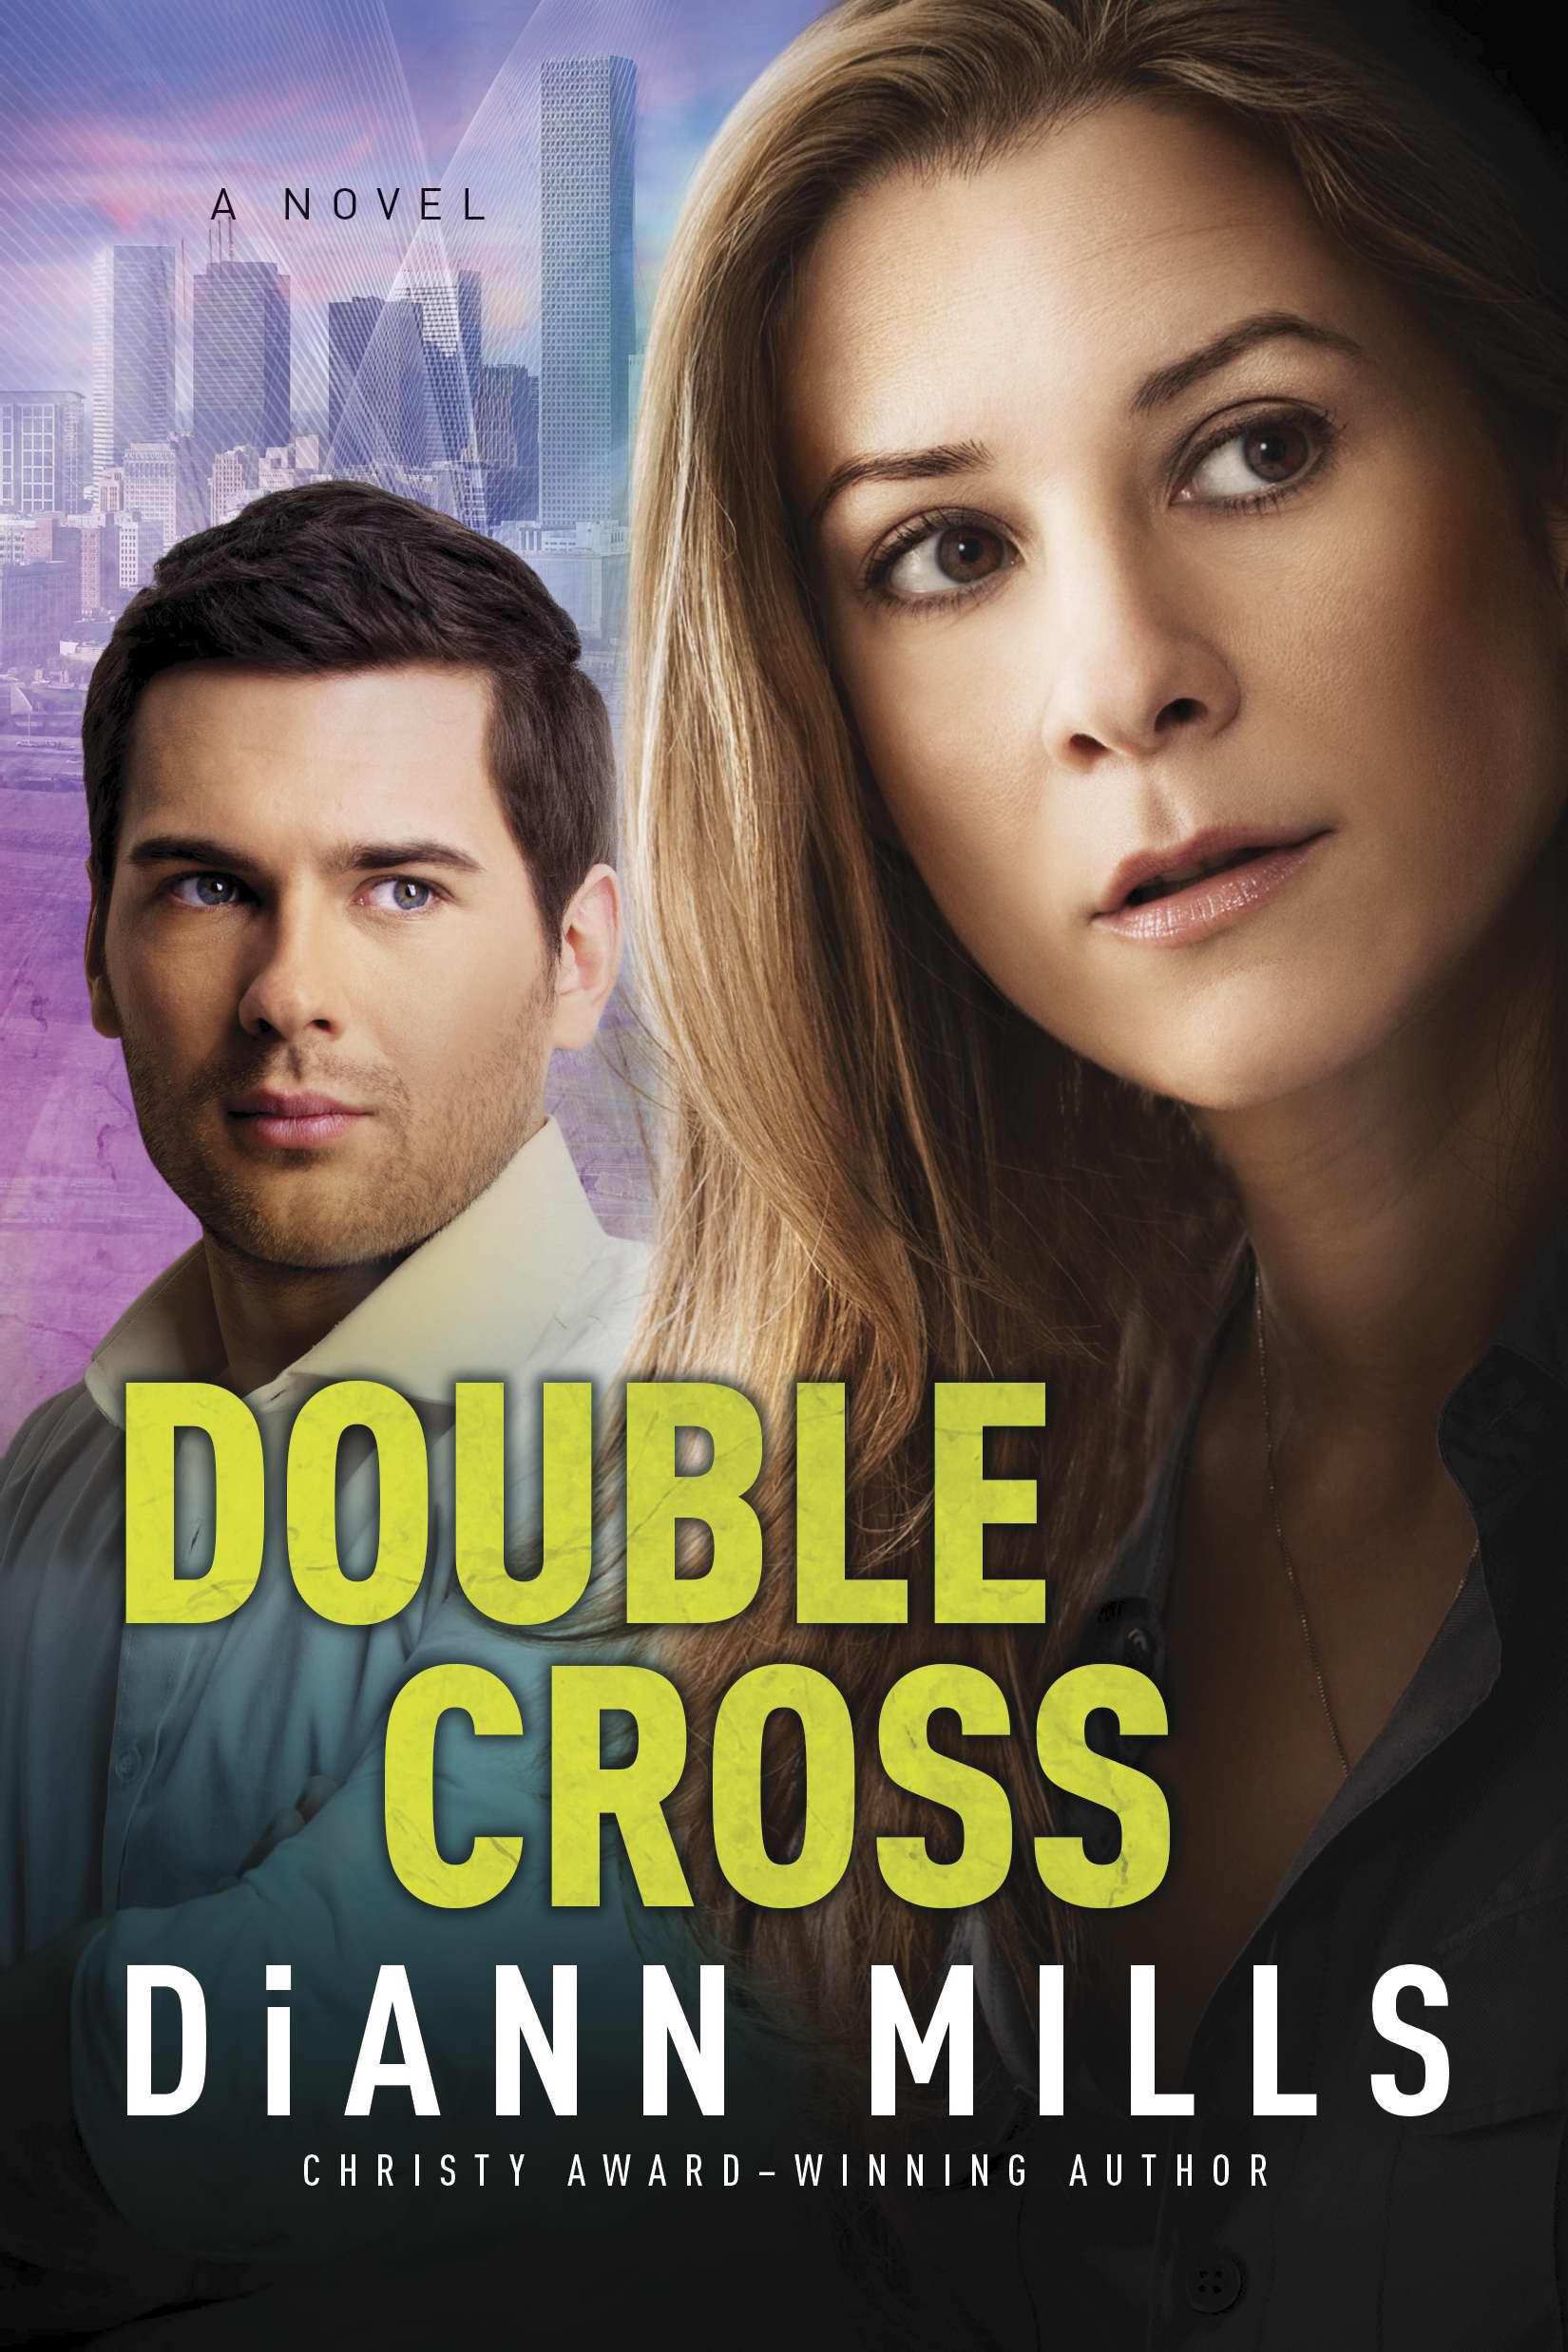 Image of Double Cross other